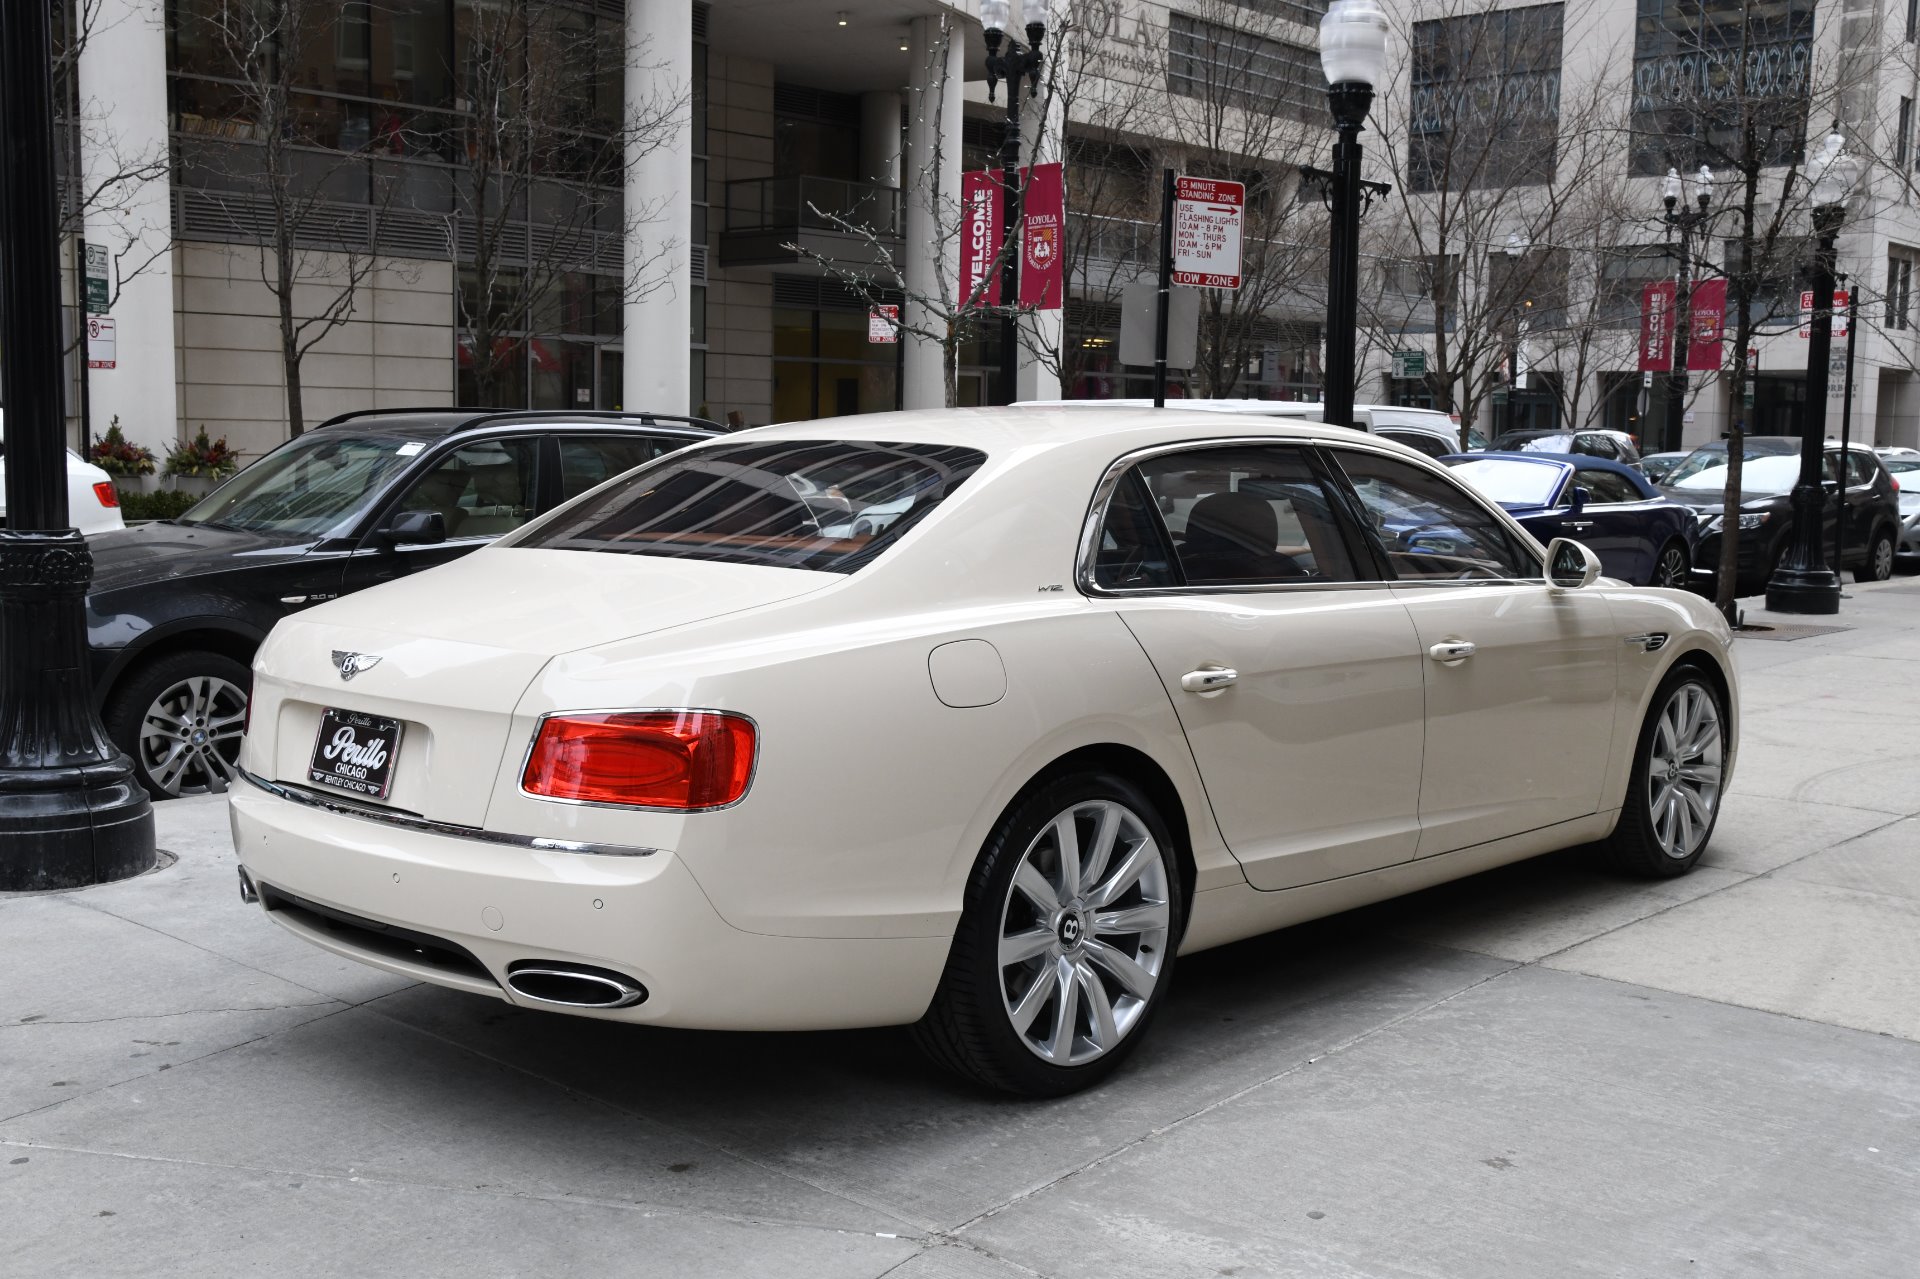 2018 Bentley Flying Spur W12 Stock # B1133 for sale near Chicago, IL | IL  Bentley Dealer